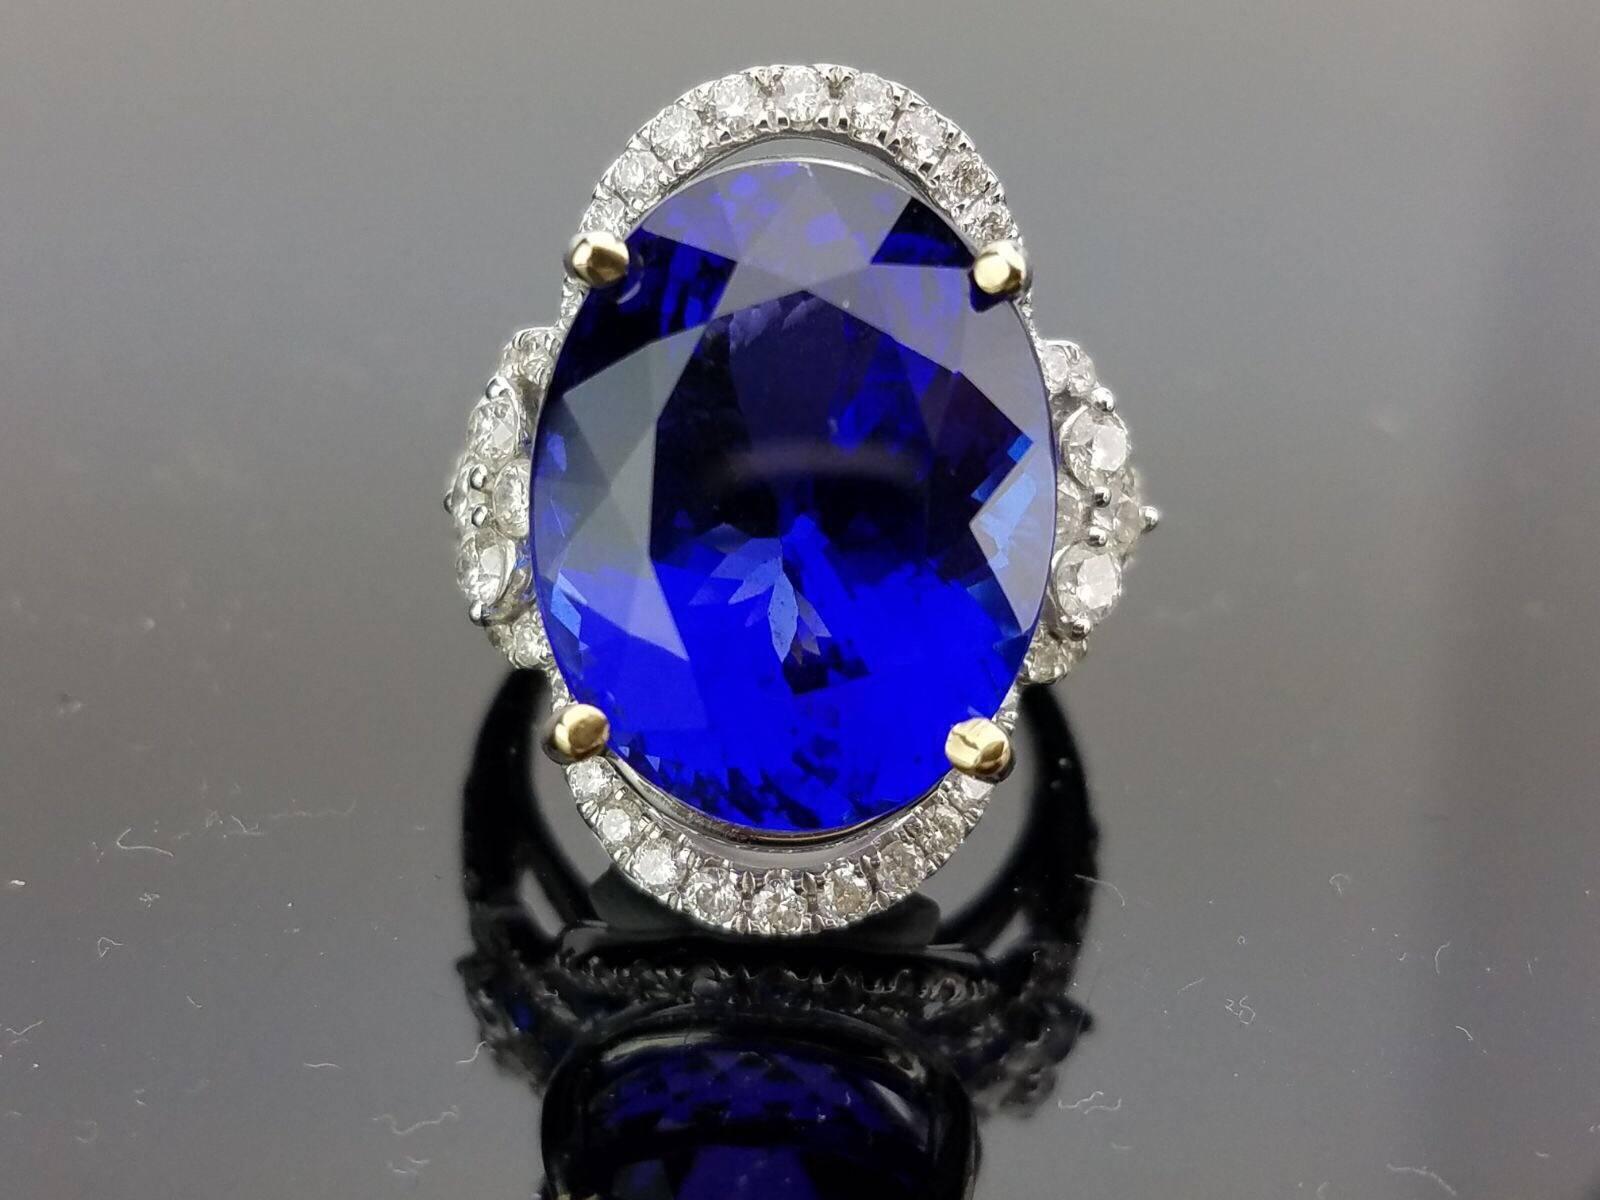 Statement Oval Tanzanite and Diamond Ring on 18K White Gold band

Centre Stone Details:  
Stone: Tanzanite
Cut: Oval
Weight: 18.15 carat

Diamond Details:
Cut: Brilliant (round) 
Total Carat Weight: 1.19 carat 
Quality: VS/SI , H/I 

18K Gold: 8.66